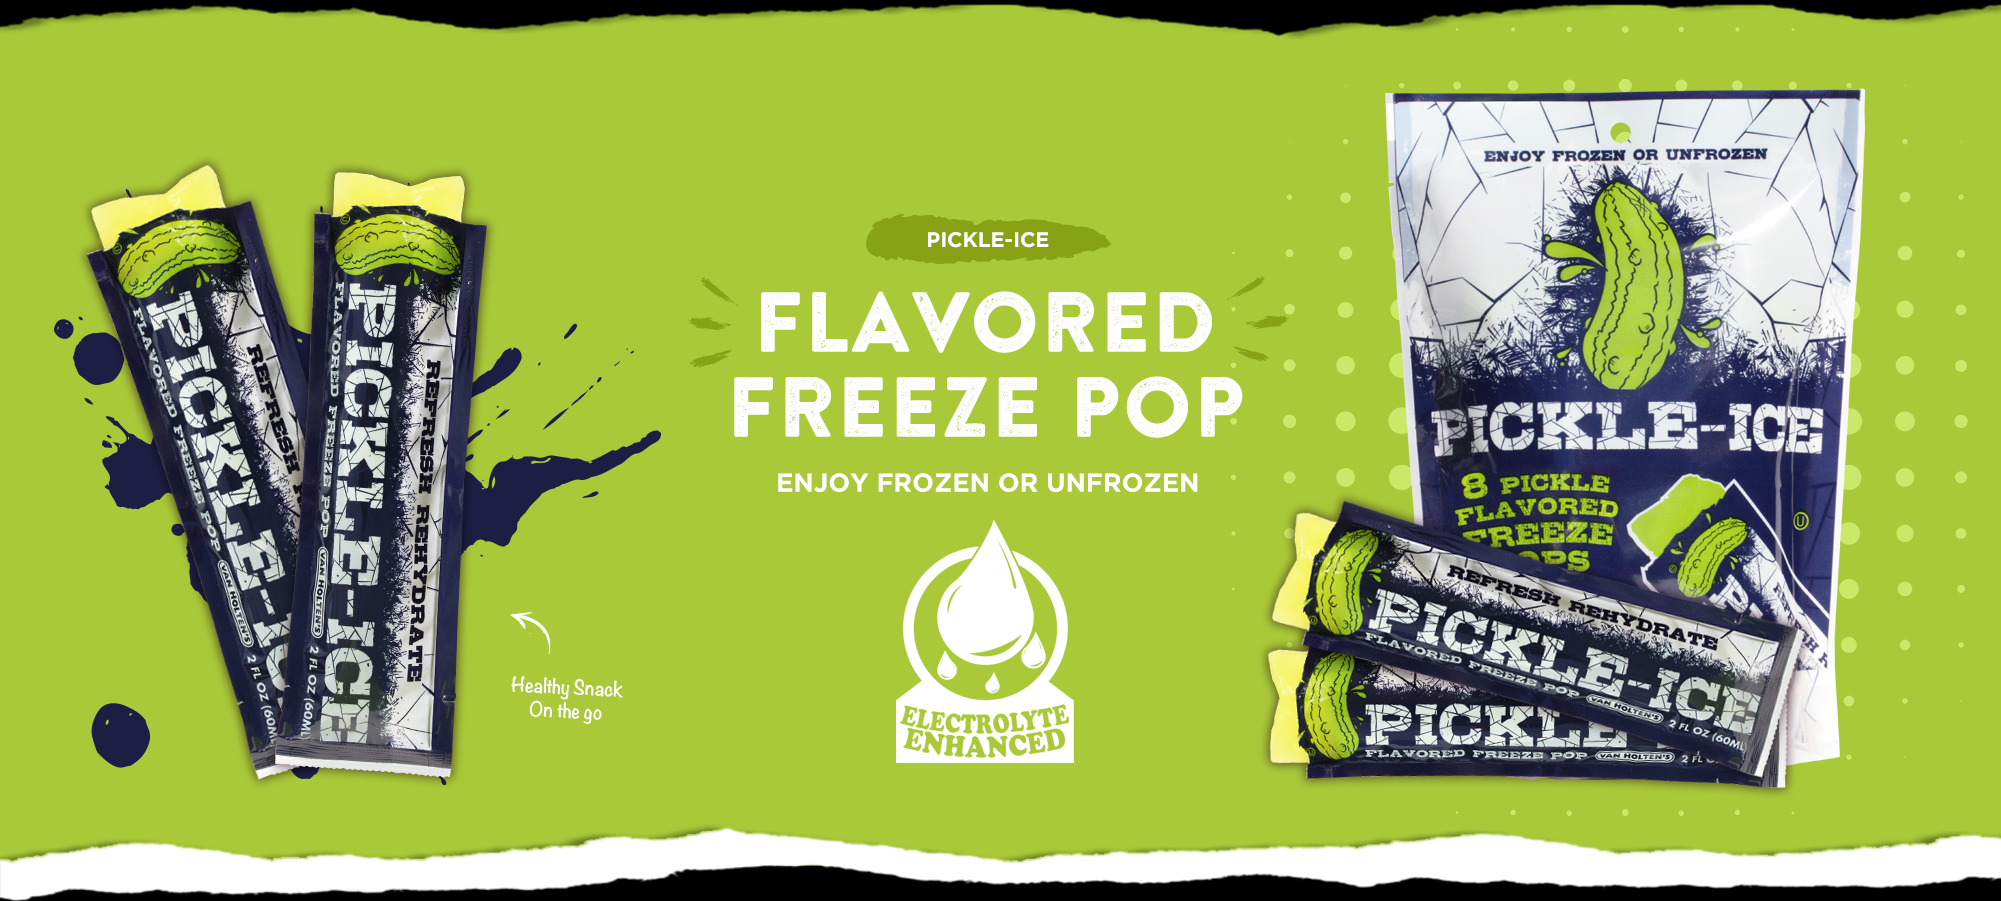 Pickle-Ice Flavored Freeze Pops